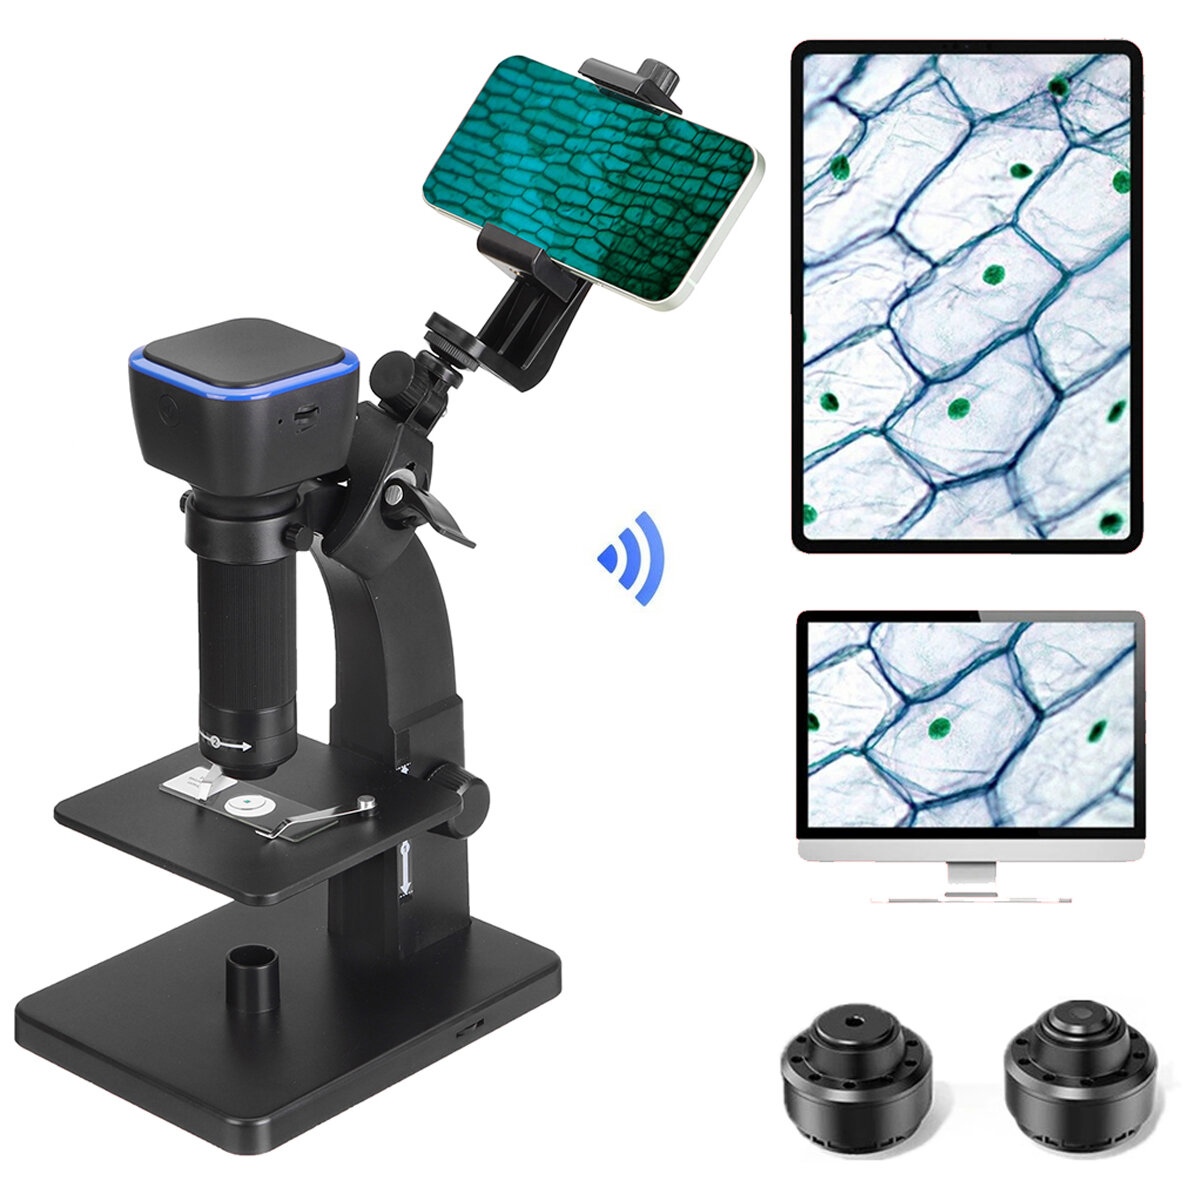 Image of MUSTOOL MT315W HD 2000X WIFI Digital Microscope Dual Lens USB Microbiological Observation Industrial Microscopes Profess